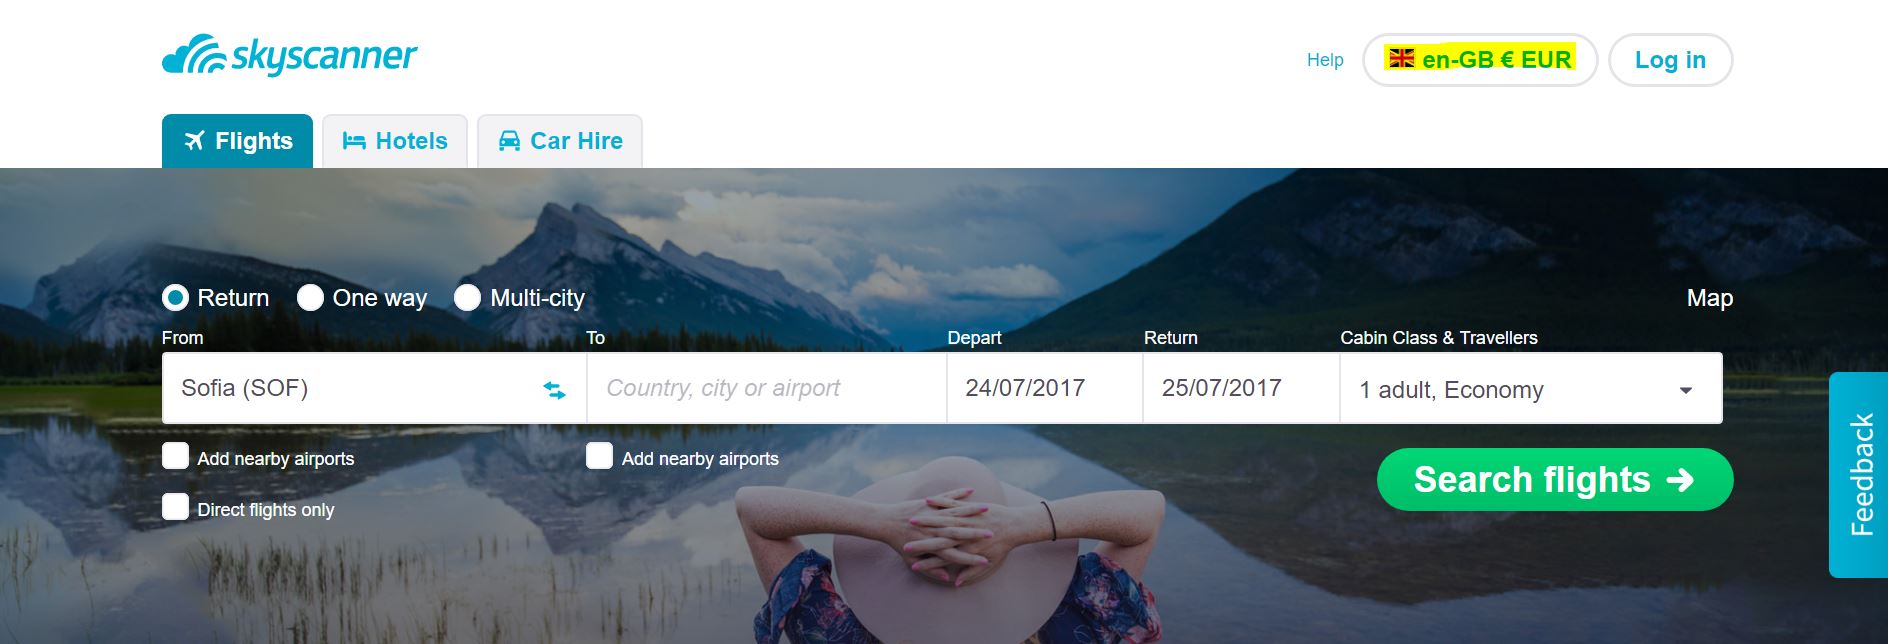 6-Skyscanner-Review